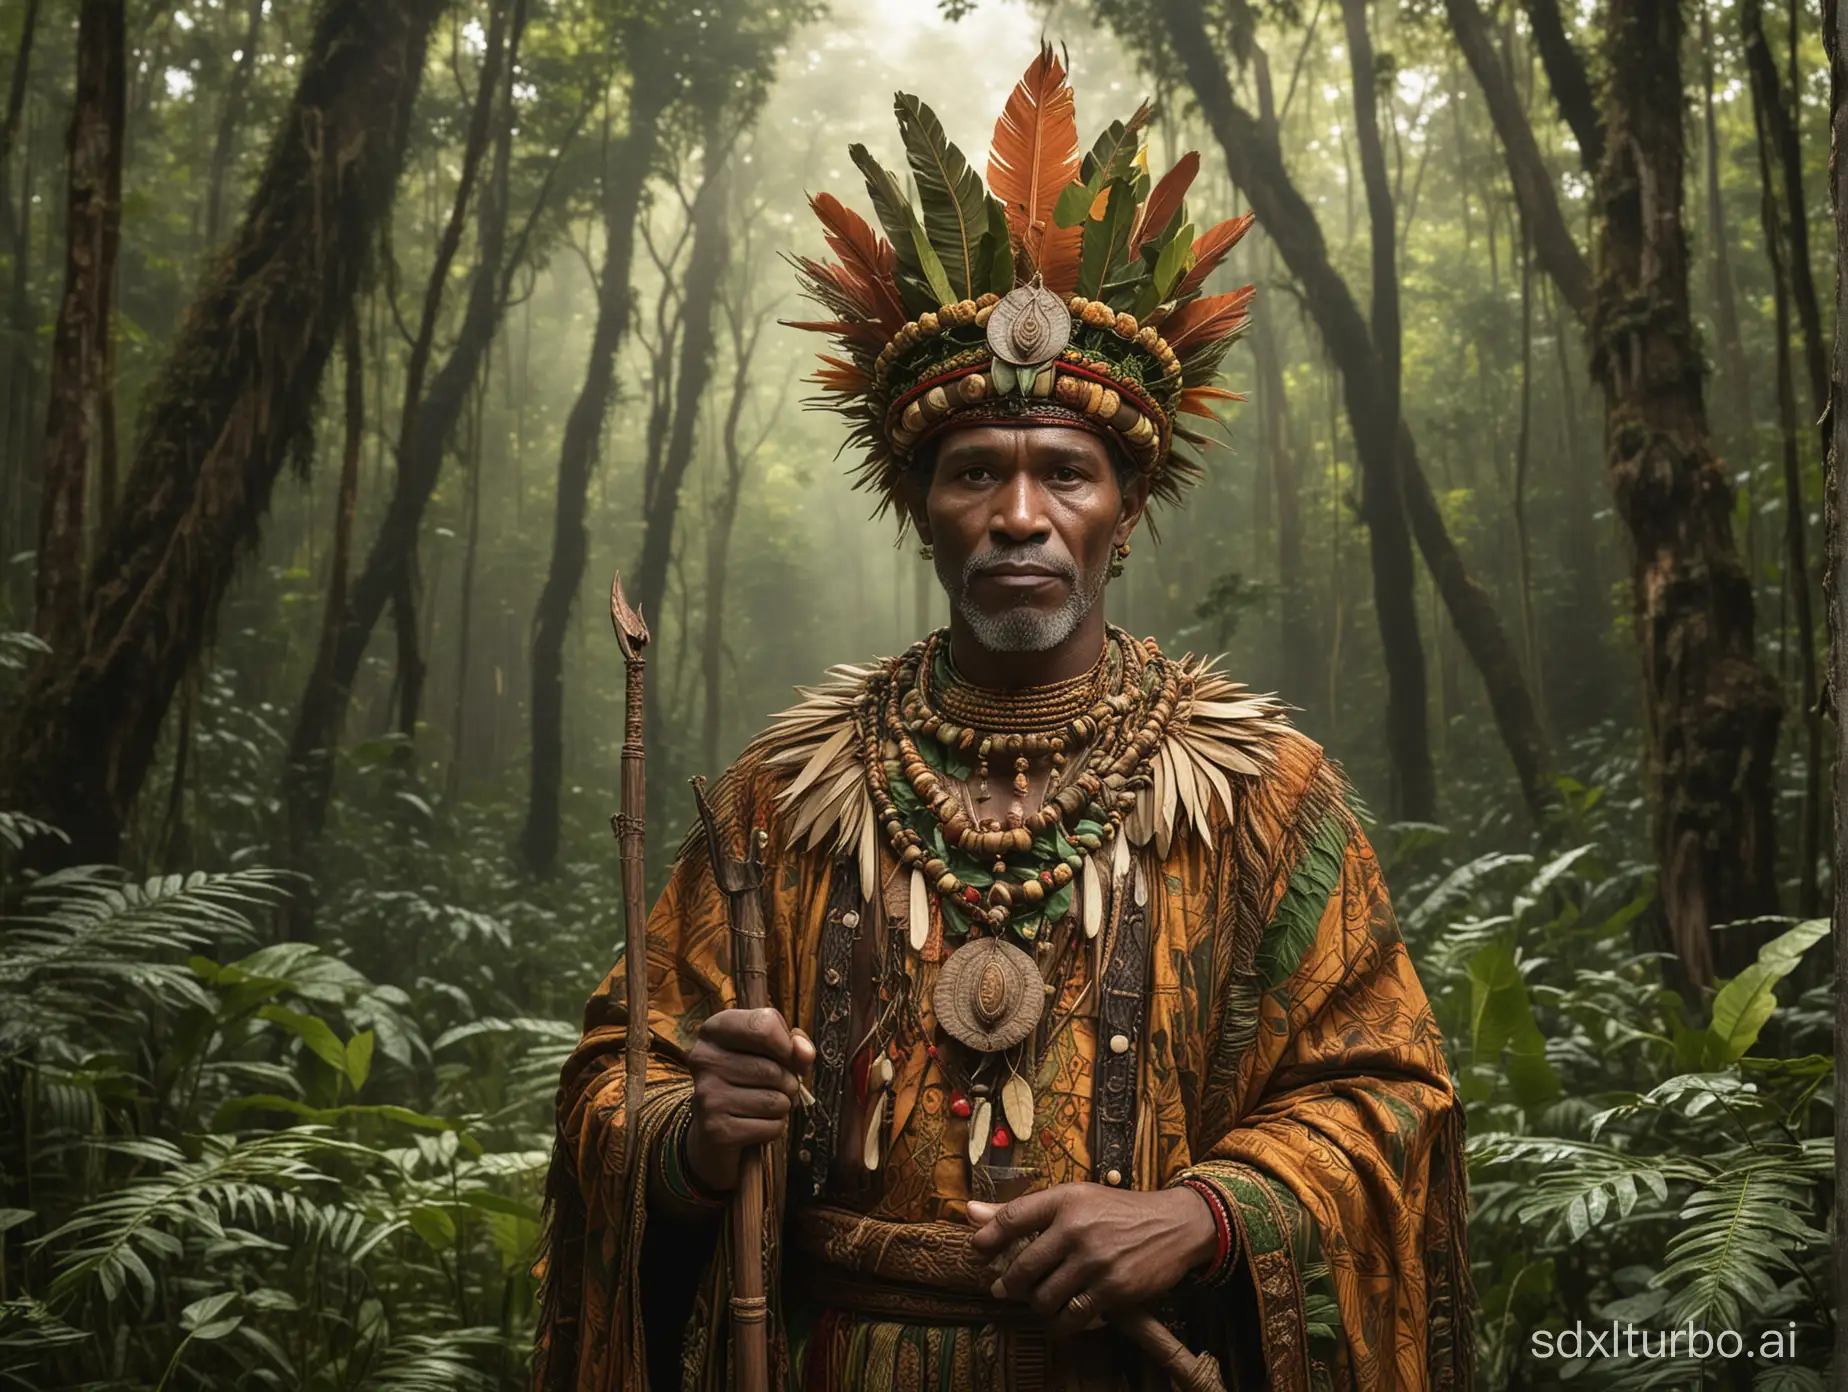 Majestic-Quilombola-King-Guarding-Forests-with-Jurema-Ceremony